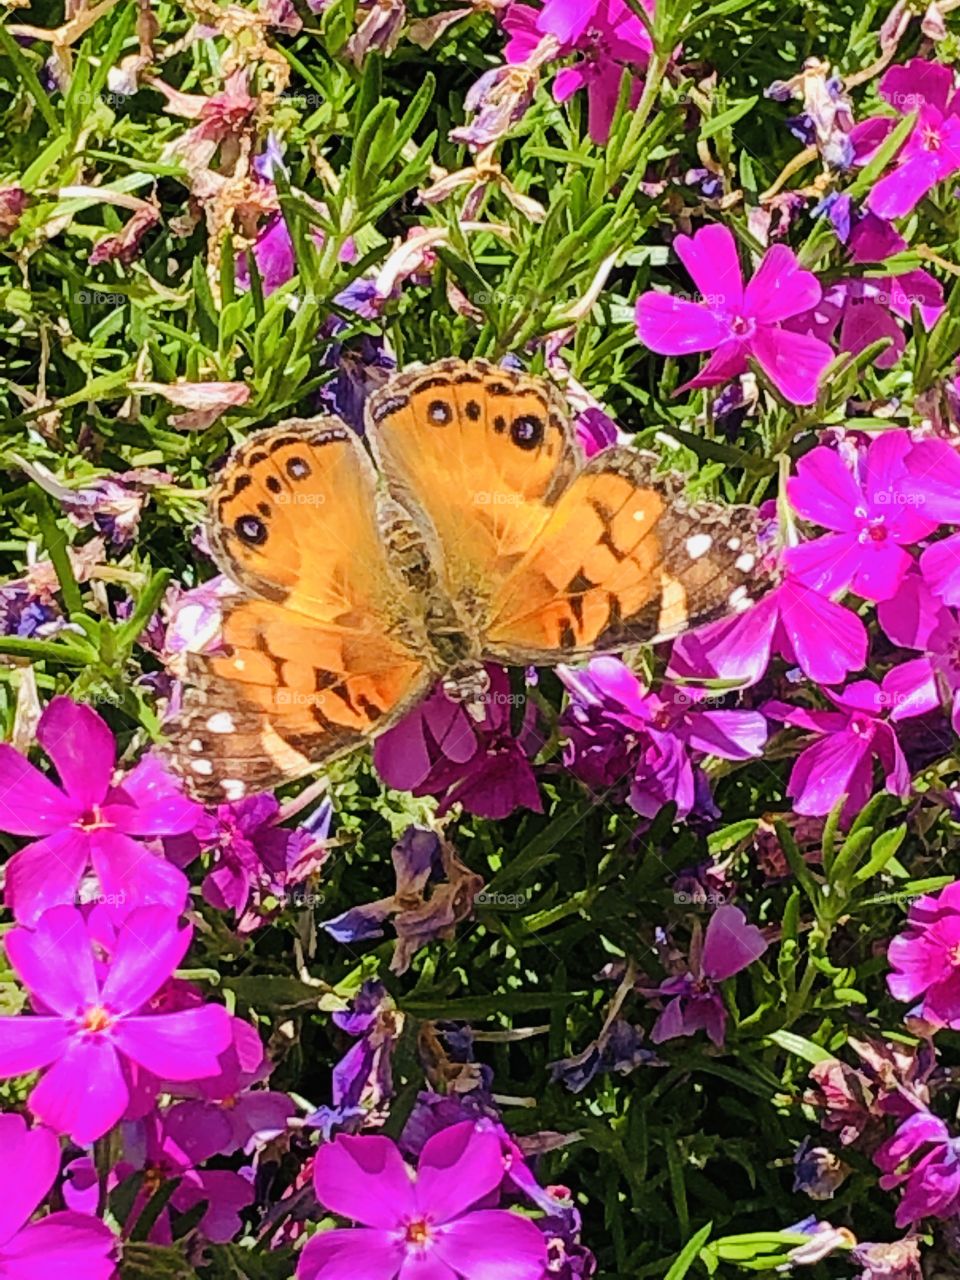 Butterfly on some flowers